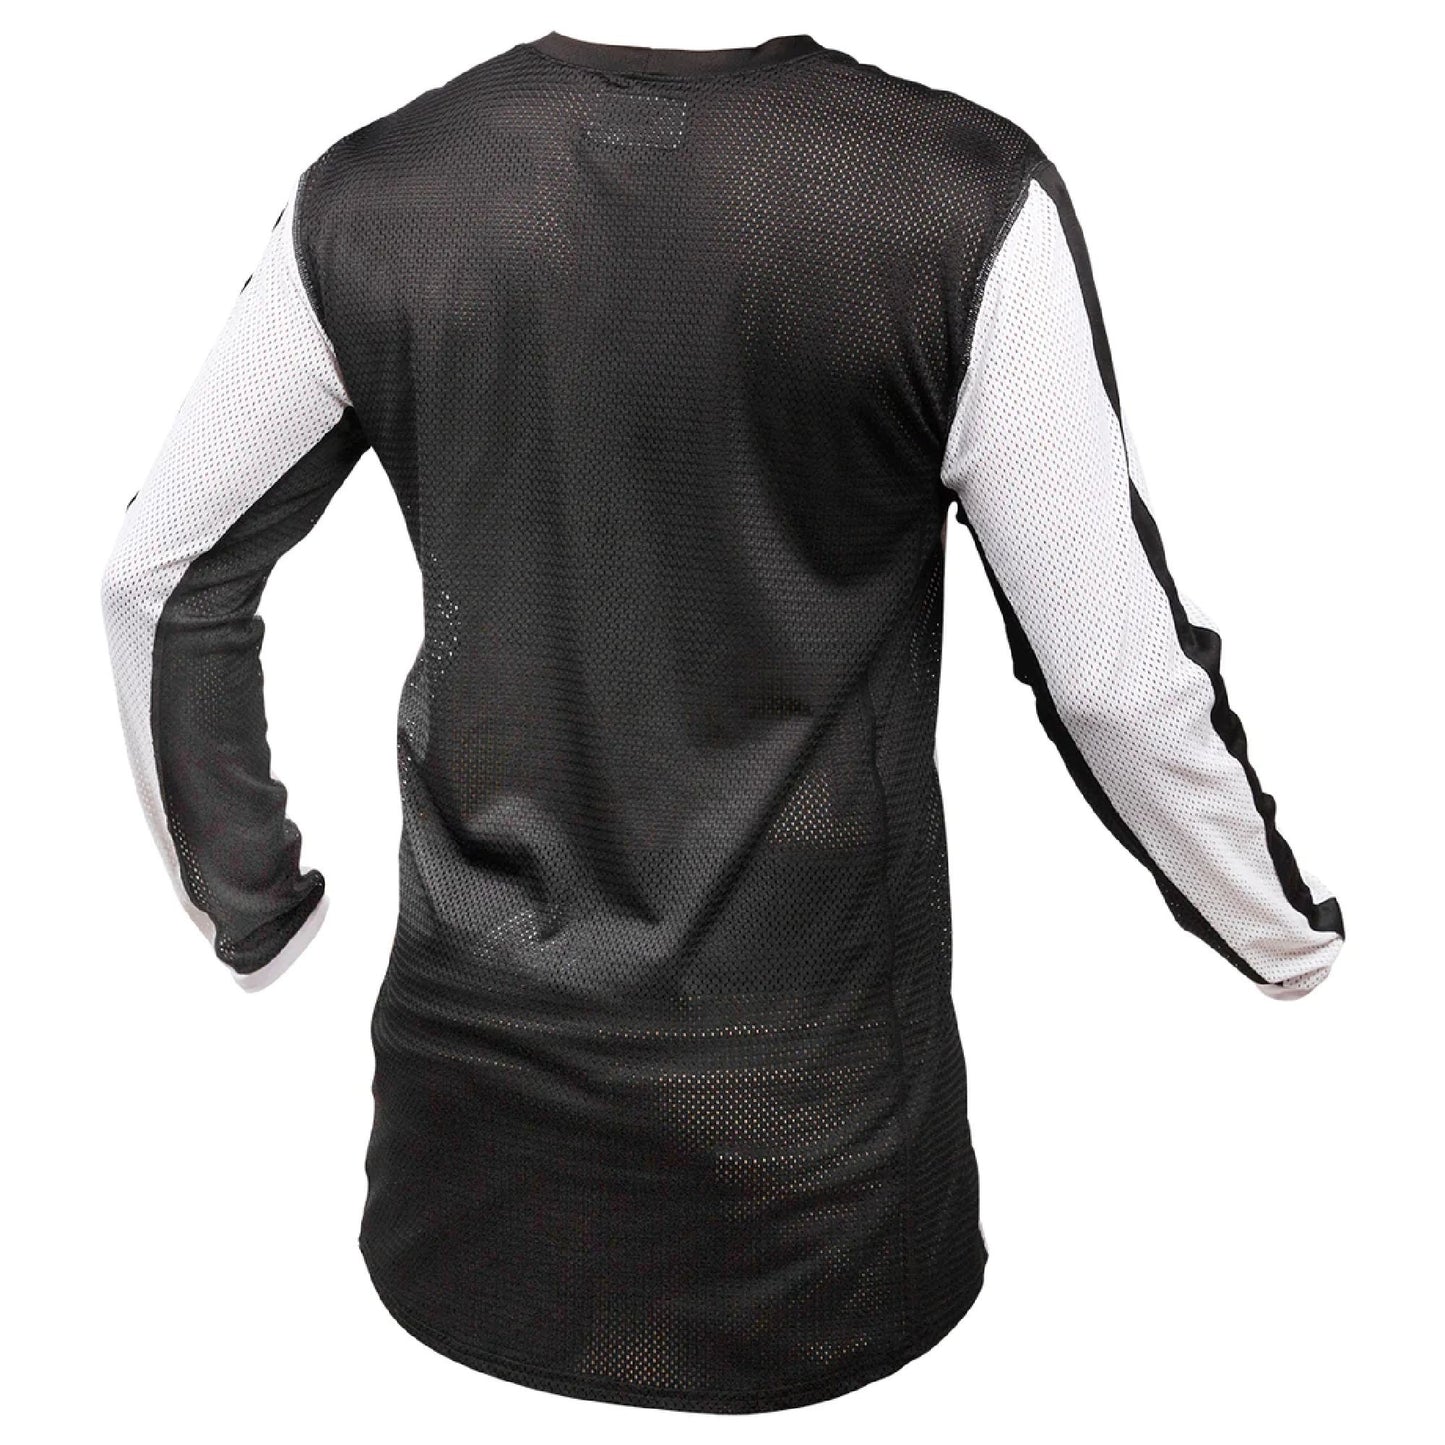 Fasthouse USA Originals Air Cooled Jersey White Black - Fasthouse Bike Jerseys